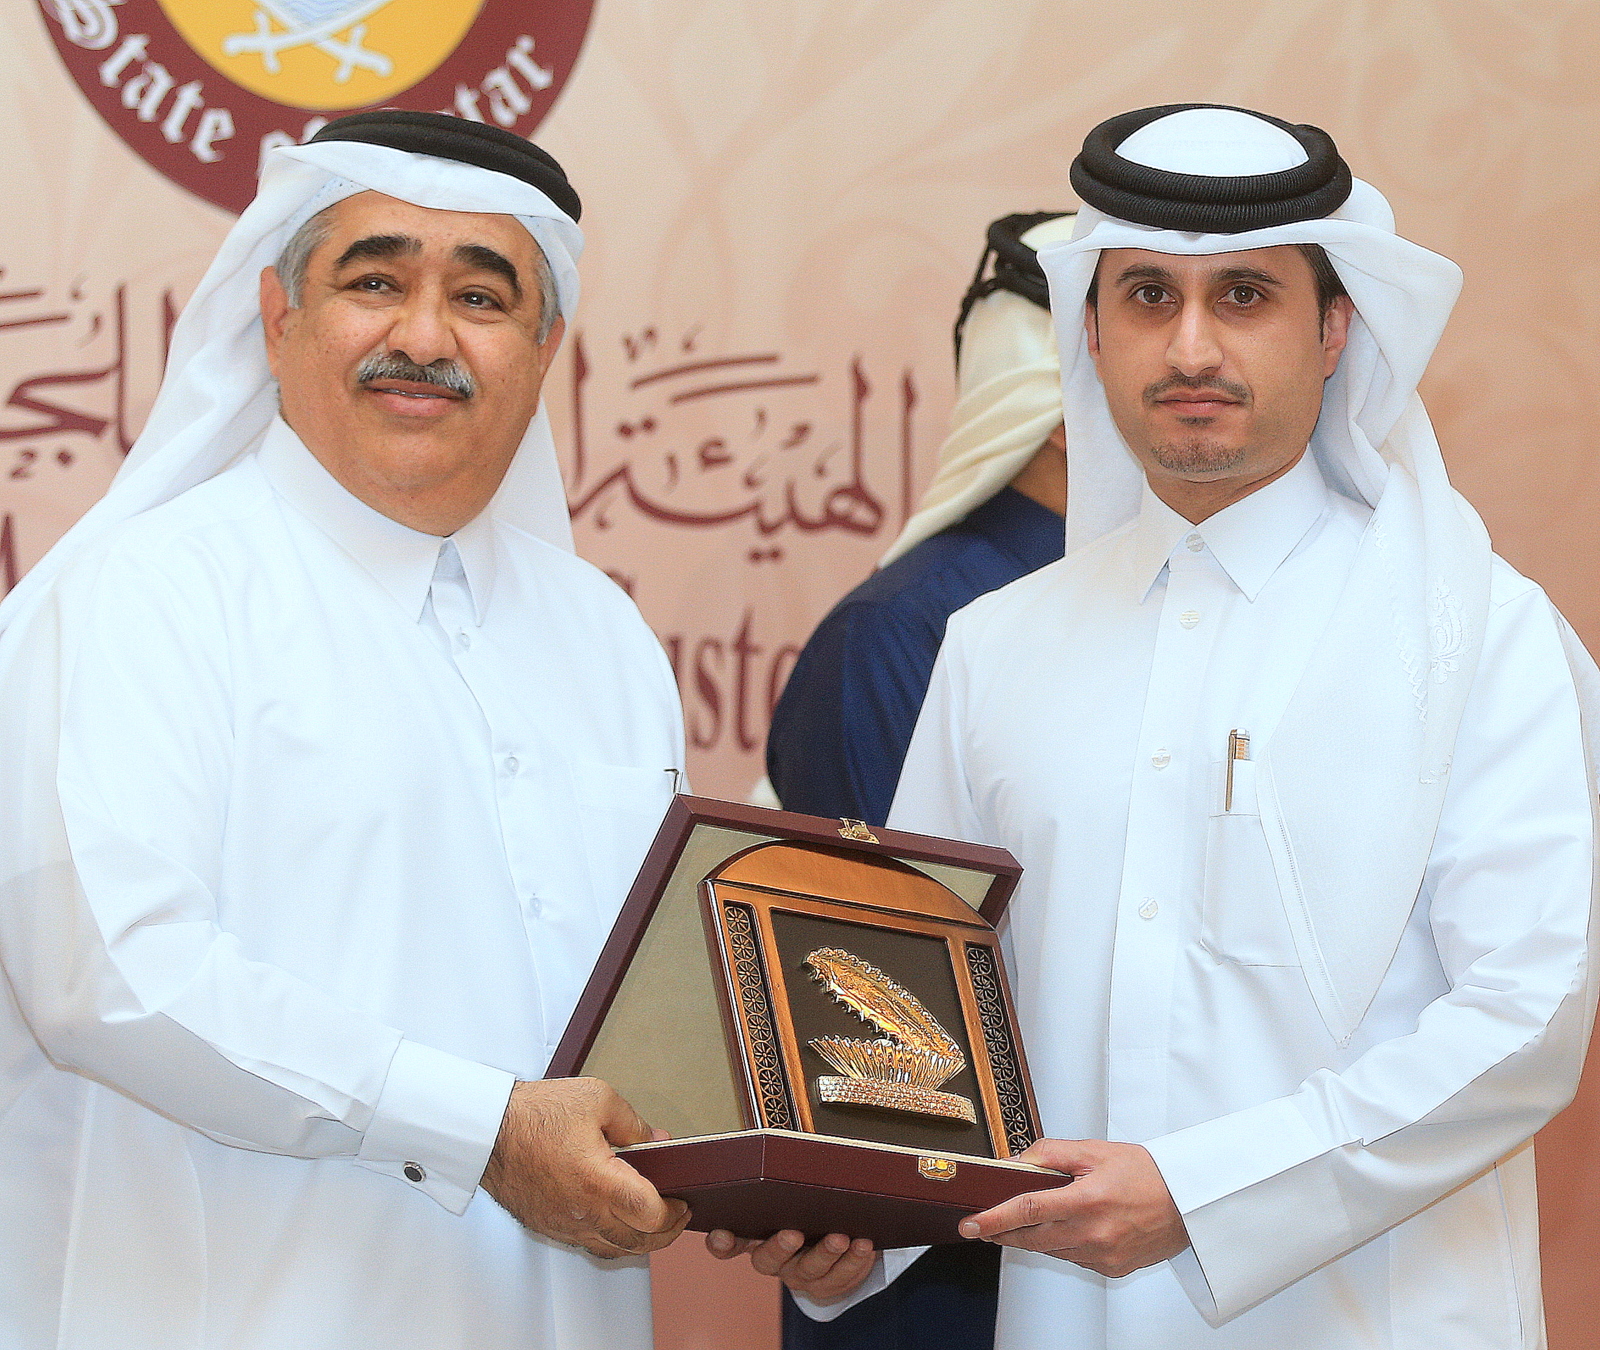 malomatia recognized by General Authority of Customs